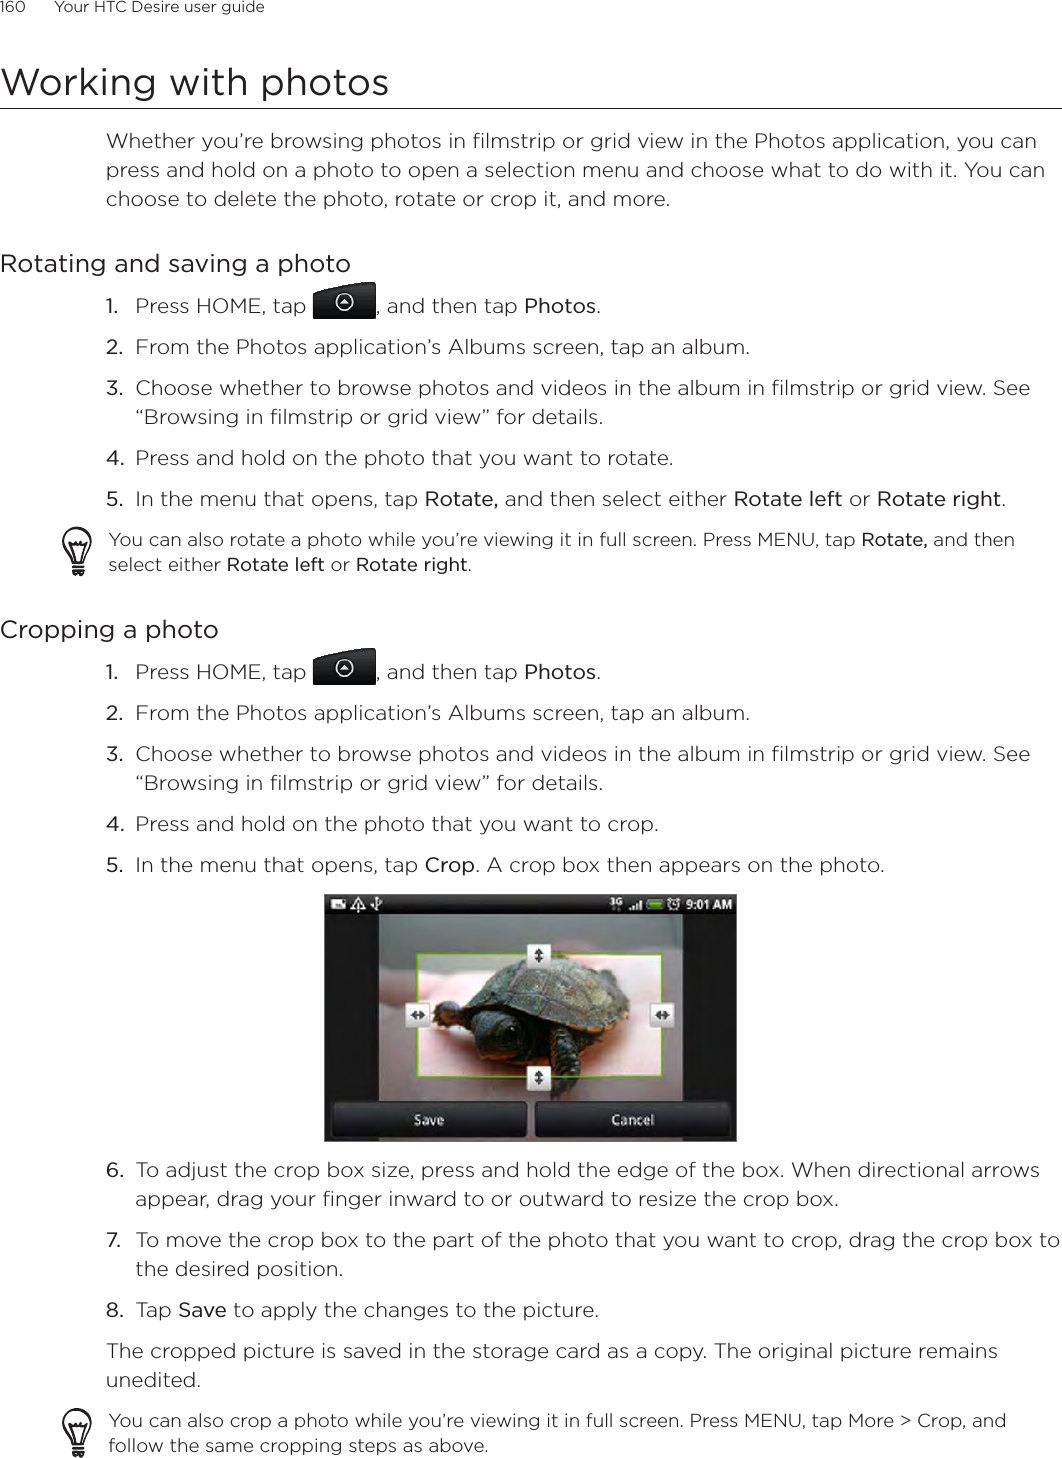 160      Your HTC Desire user guide      Working with photosWhether you’re browsing photos in filmstrip or grid view in the Photos application, you can press and hold on a photo to open a selection menu and choose what to do with it. You can choose to delete the photo, rotate or crop it, and more.Rotating and saving a photoPress HOME, tap  , and then tap Photos.From the Photos application’s Albums screen, tap an album.Choose whether to browse photos and videos in the album in filmstrip or grid view. See “Browsing in filmstrip or grid view” for details.Press and hold on the photo that you want to rotate.In the menu that opens, tap Rotate, and then select either Rotate left or Rotate right.You can also rotate a photo while you’re viewing it in full screen. Press MENU, tap Rotate, and then select either Rotate left or Rotate right.Cropping a photo1. Press HOME, tap  , and then tap Photos.2. From the Photos application’s Albums screen, tap an album.3. Choose whether to browse photos and videos in the album in filmstrip or grid view. See “Browsing in filmstrip or grid view” for details.4. Press and hold on the photo that you want to crop.5. In the menu that opens, tap Crop. A crop box then appears on the photo.6. To adjust the crop box size, press and hold the edge of the box. When directional arrows appear, drag your finger inward to or outward to resize the crop box.7. To move the crop box to the part of the photo that you want to crop, drag the crop box to the desired position.8. Tap Save to apply the changes to the picture.The cropped picture is saved in the storage card as a copy. The original picture remains unedited.You can also crop a photo while you’re viewing it in full screen. Press MENU, tap More &gt; Crop, and follow the same cropping steps as above.1.2.3.4.5.